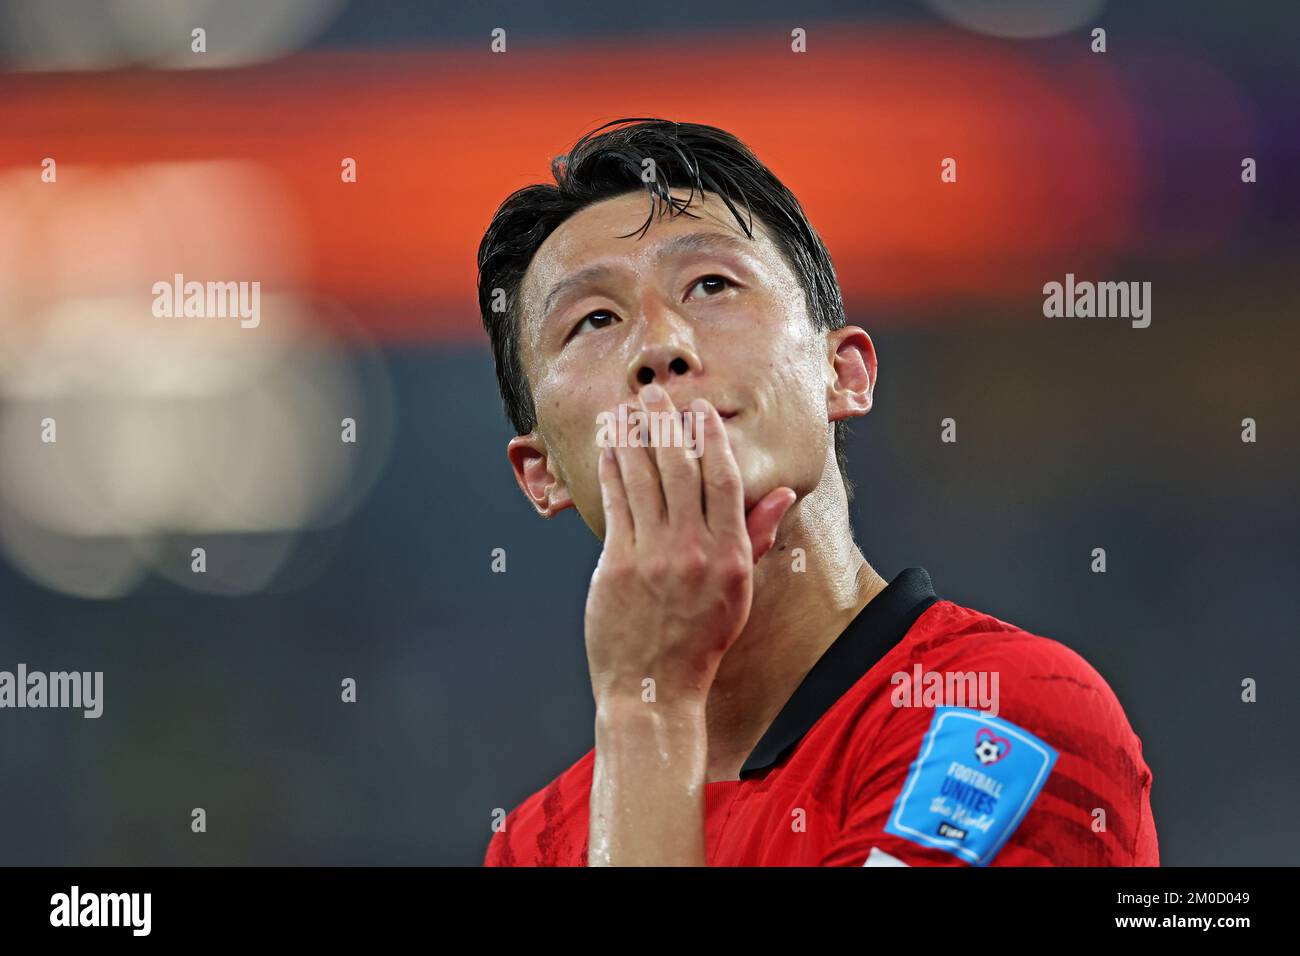 Doha, Qatar: 5th December 2022; FIFA World Cup final 16 round, Brazil versus South Korea: Lee Jae-sung of South Korea looks up at the scoreboard after they fall behind by 4-0 Stock Photo